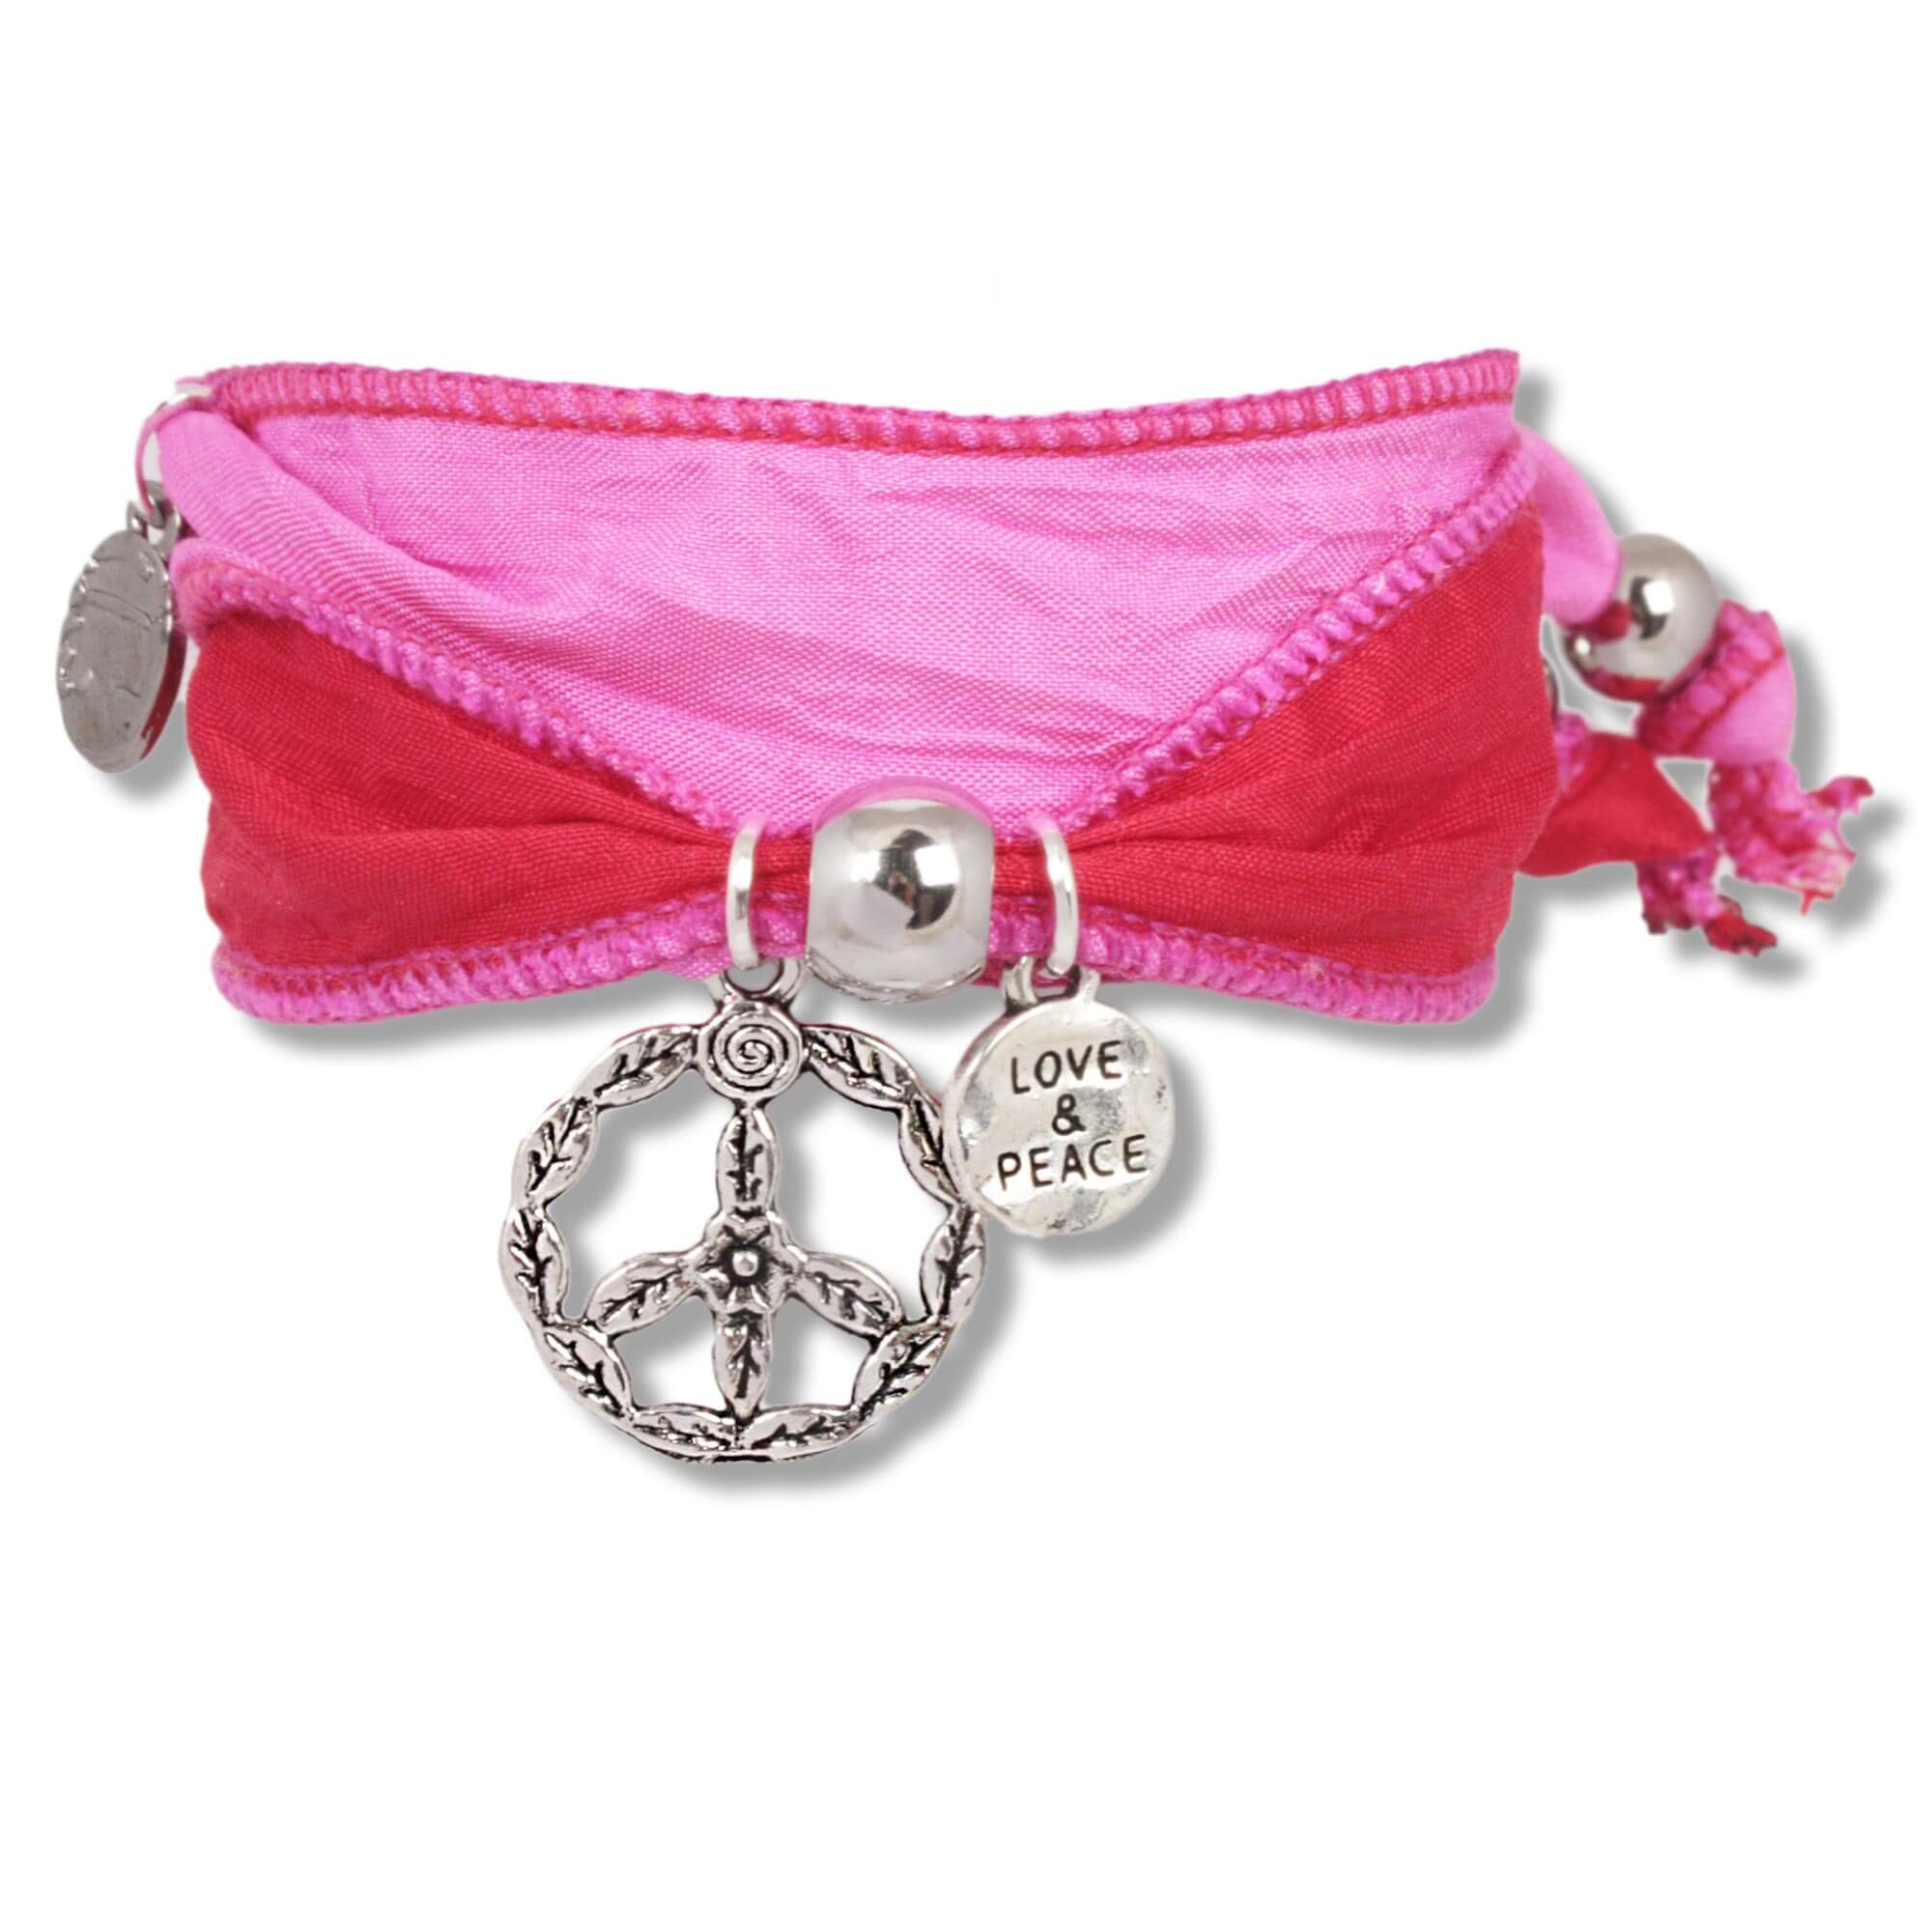 Pink-Red - Love & Peace Bracelet made from Sari fabrics